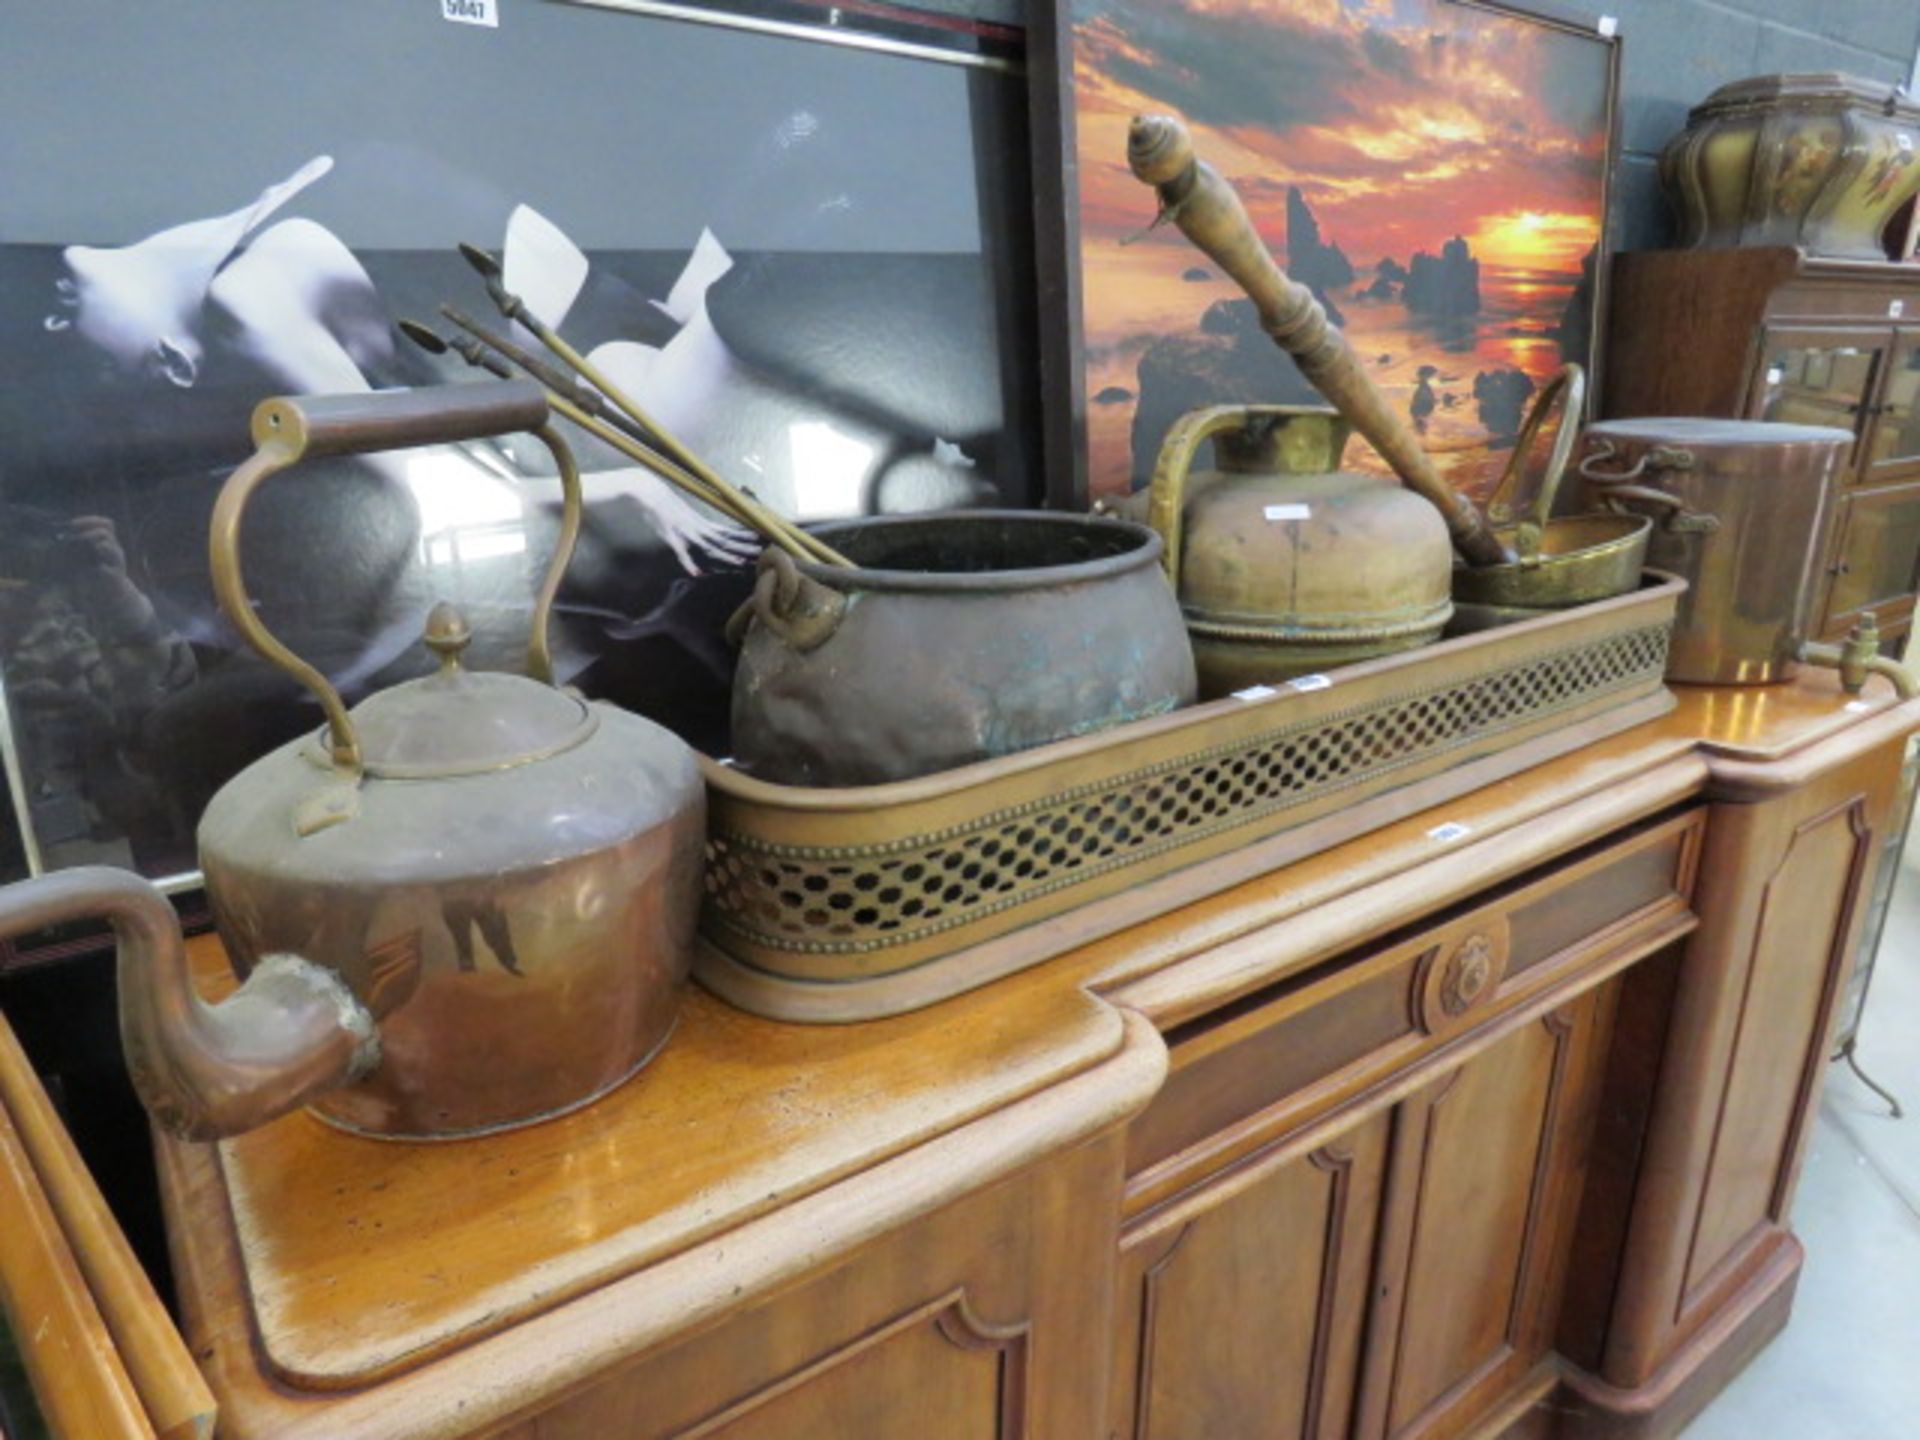 Large quantity of copperware to include kettles, pokers, teapots, vases, bedwarmers, copper pans and